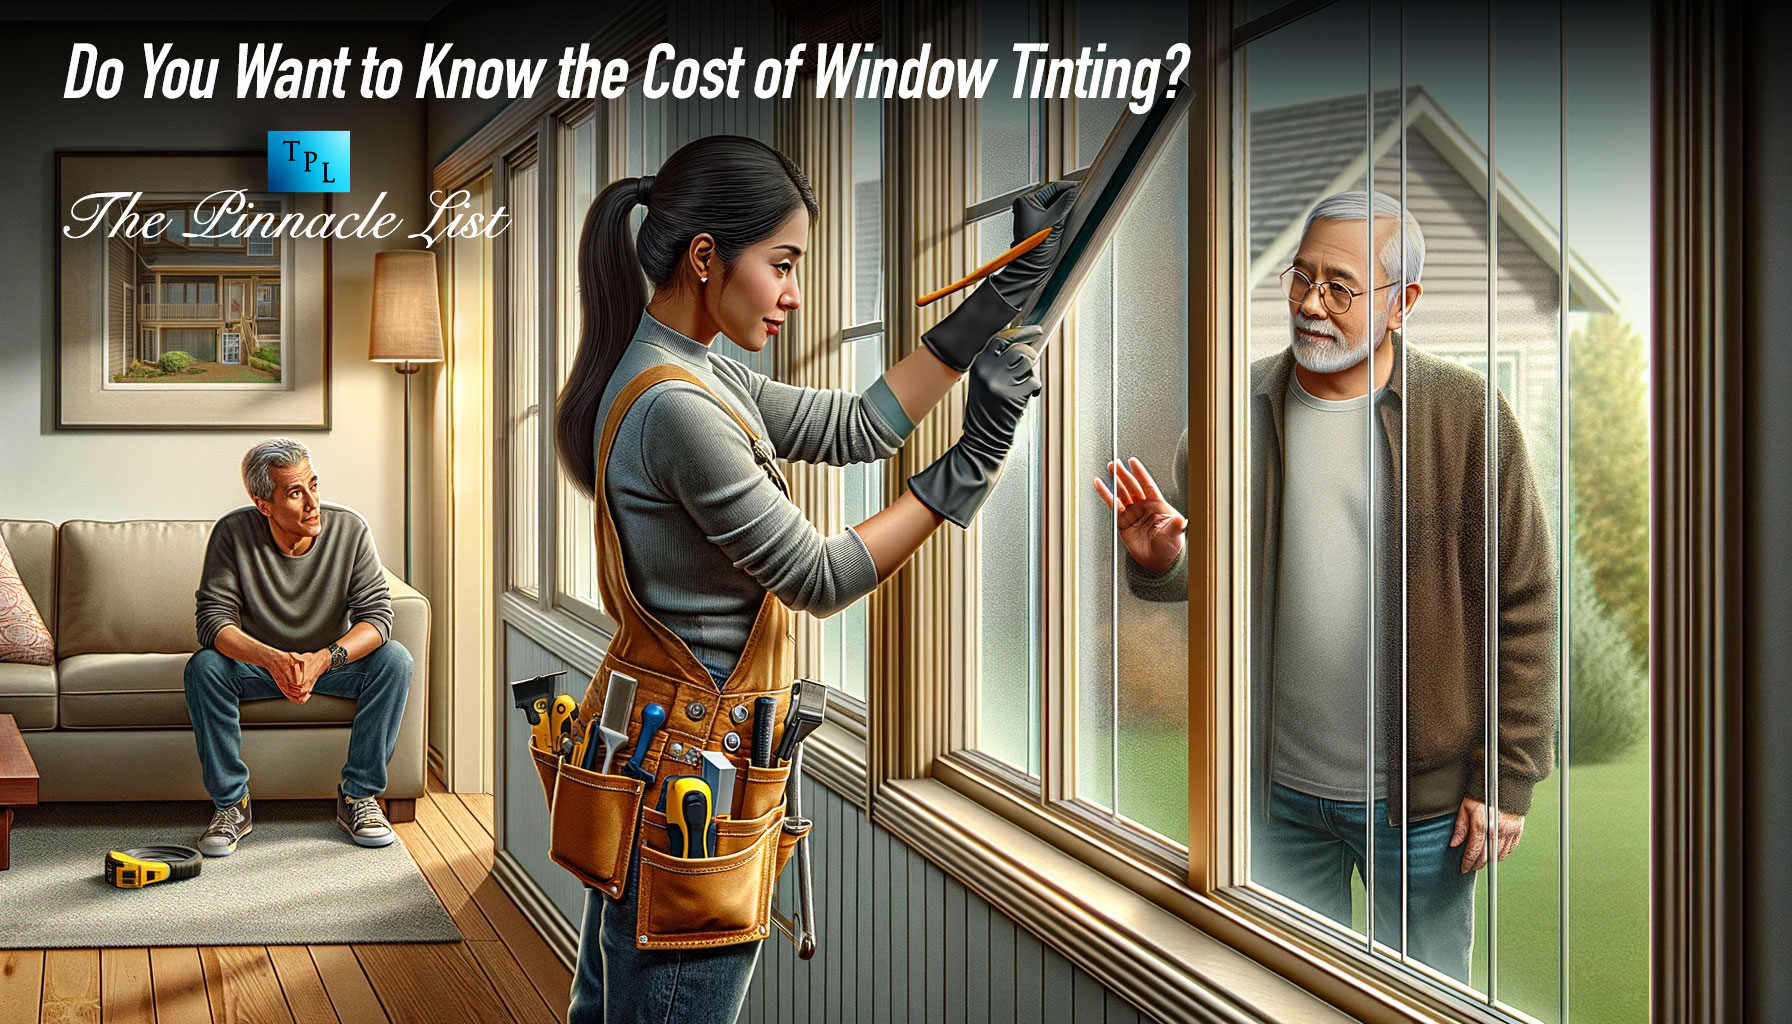 Do You Want to Know the Cost of Window Tinting?